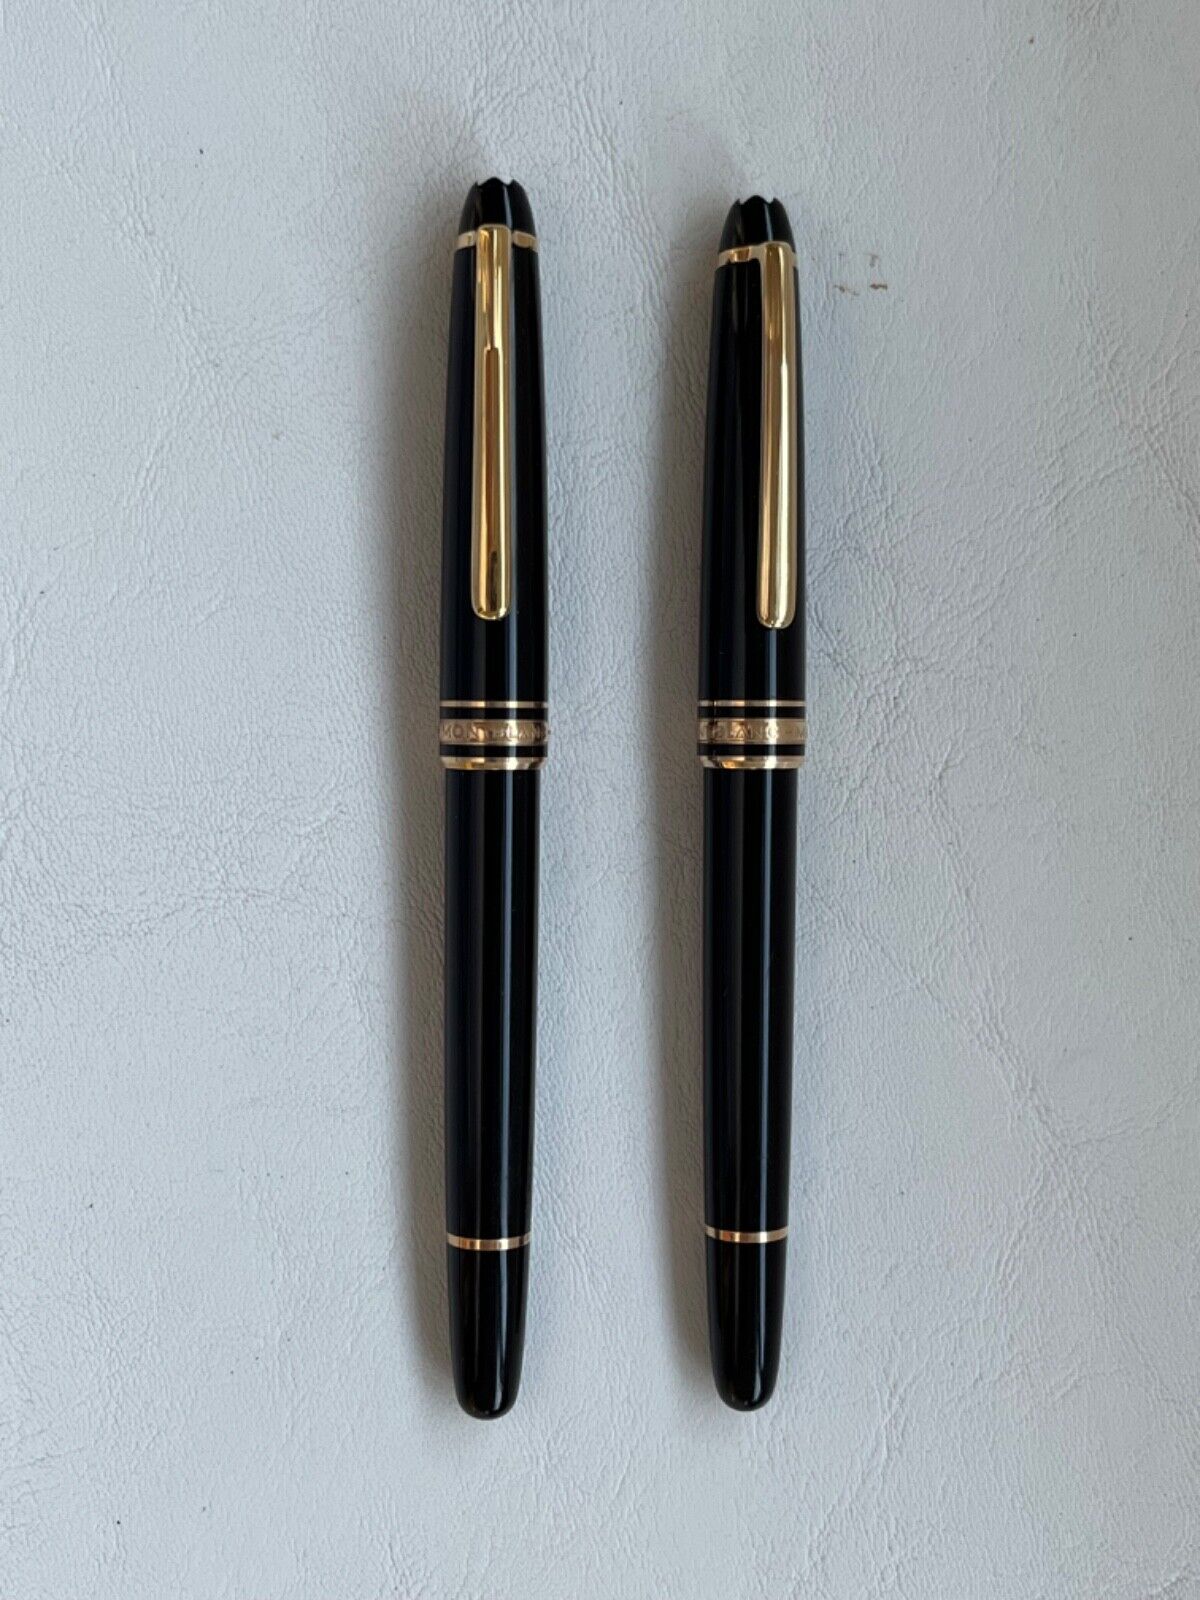 PAIR OF MONTBLANC MEISTERSTUCK BLACK & GOLD ROLLERBALL PEN GERMANY 